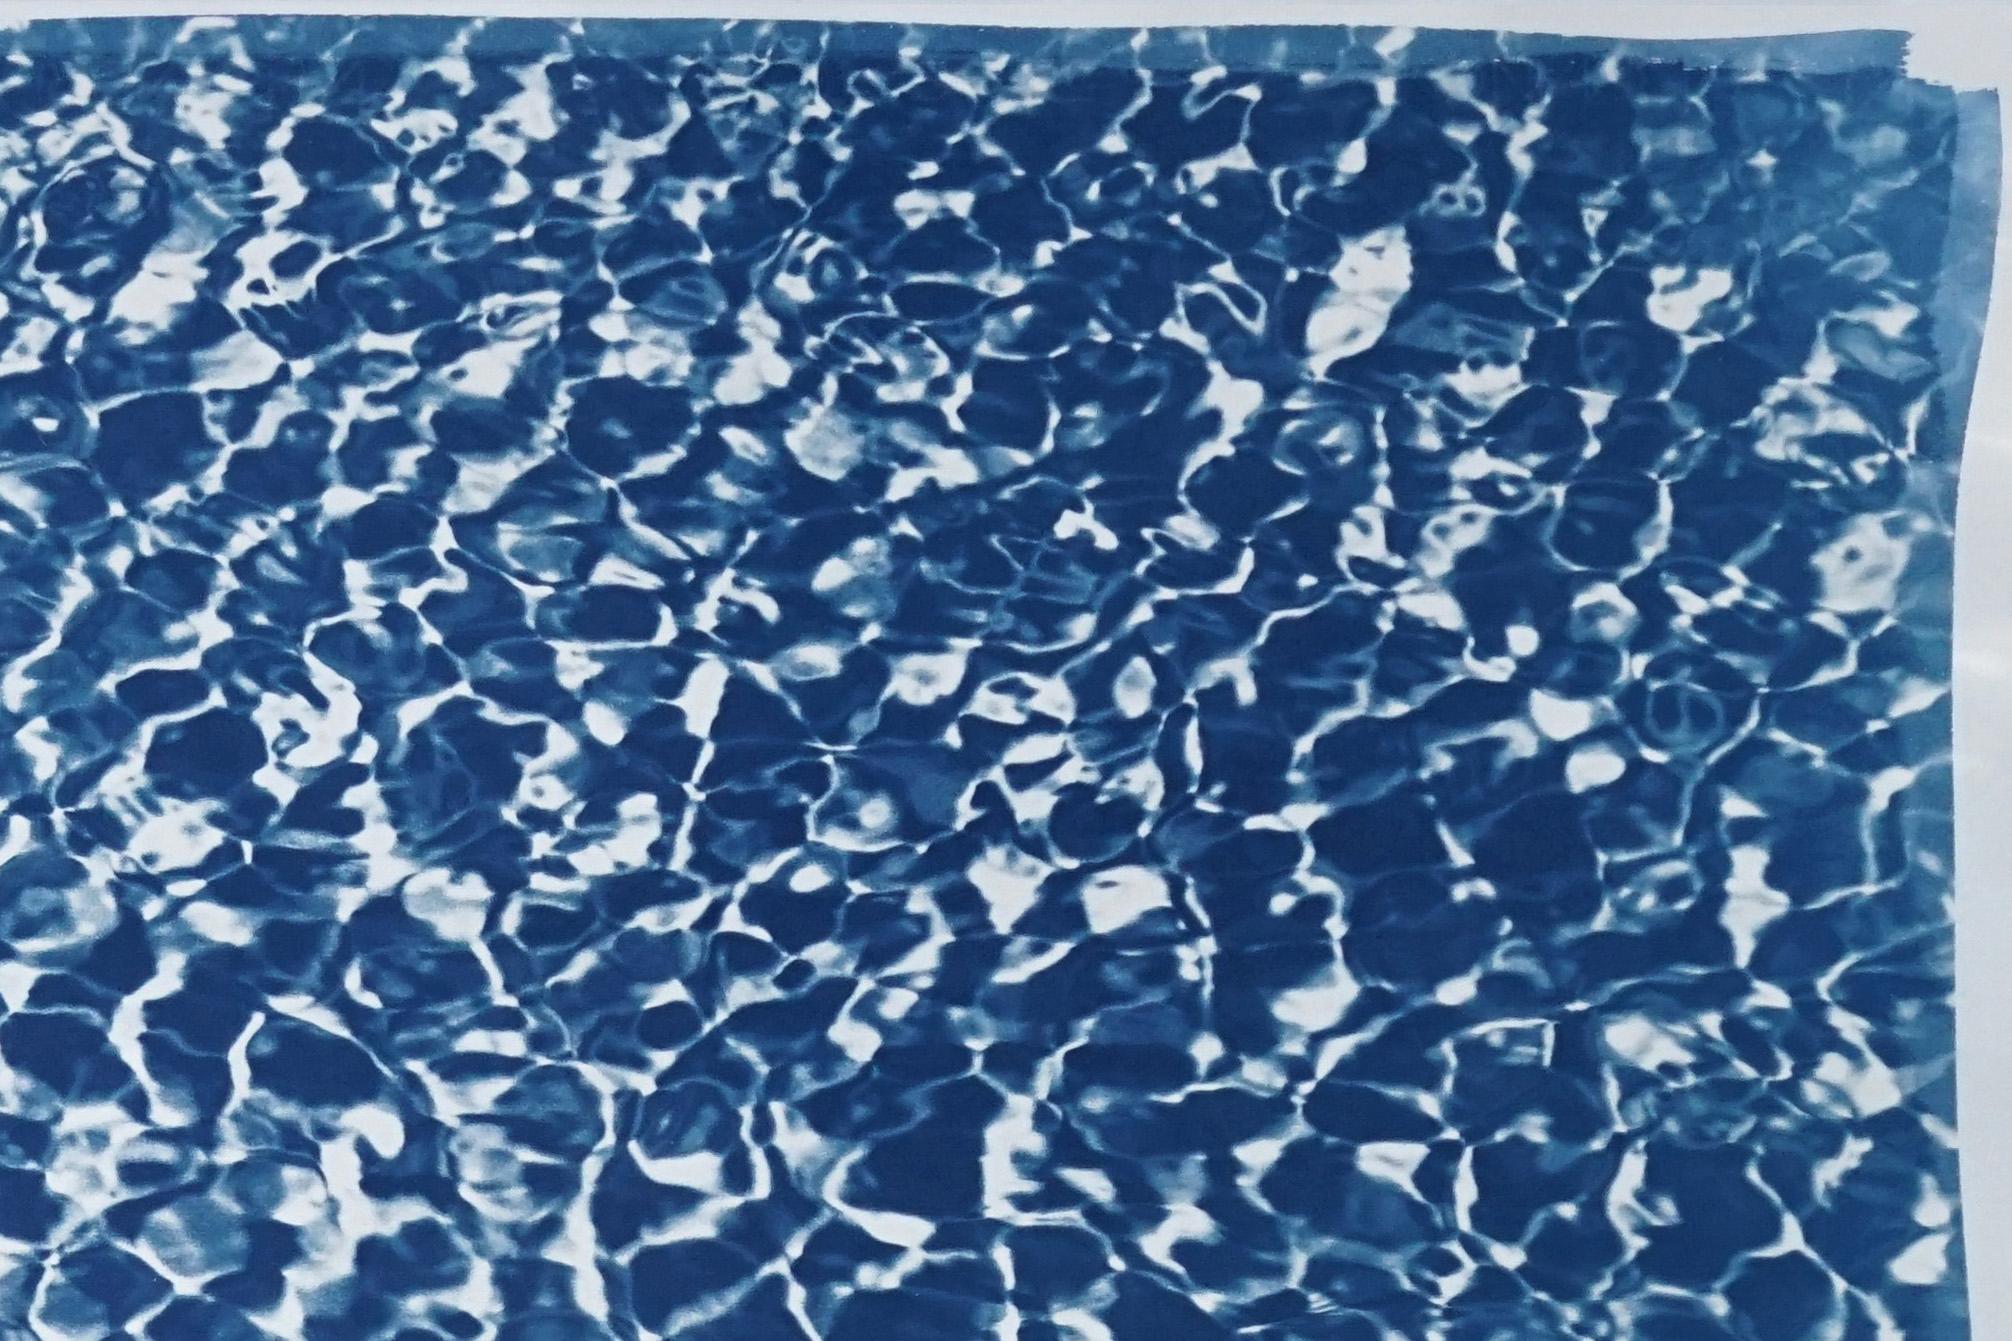 Infinity Pool Water Reflections, Blue & White Pattern, Handmade Cyanotype Print For Sale 2